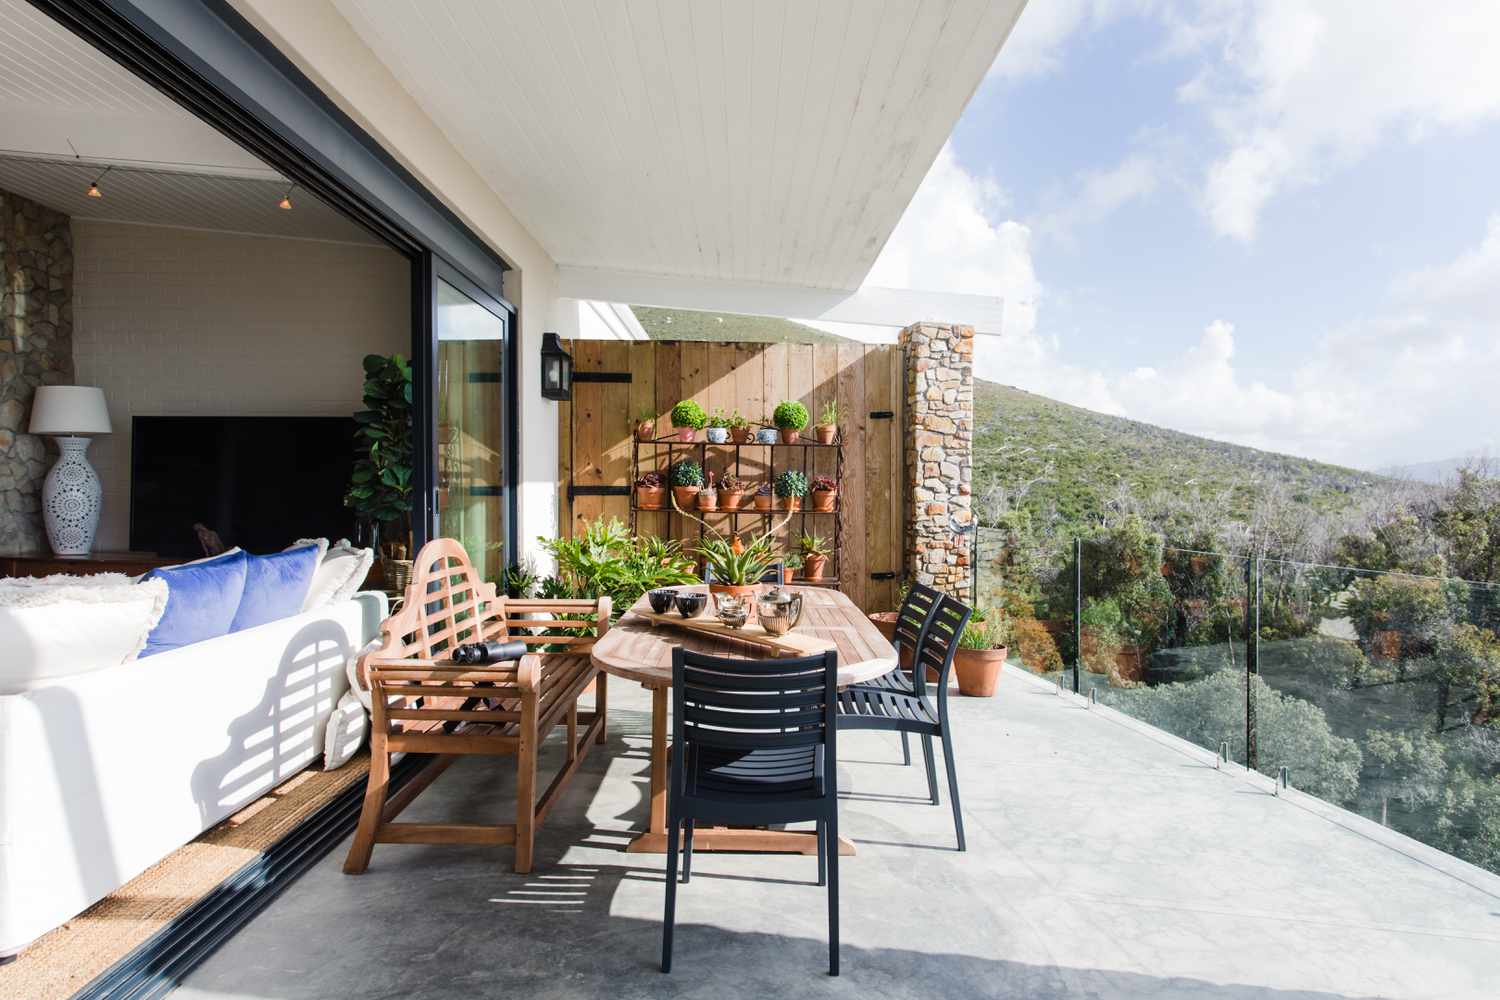 Open patio with outdoor dining table overlooking hill in sunlight